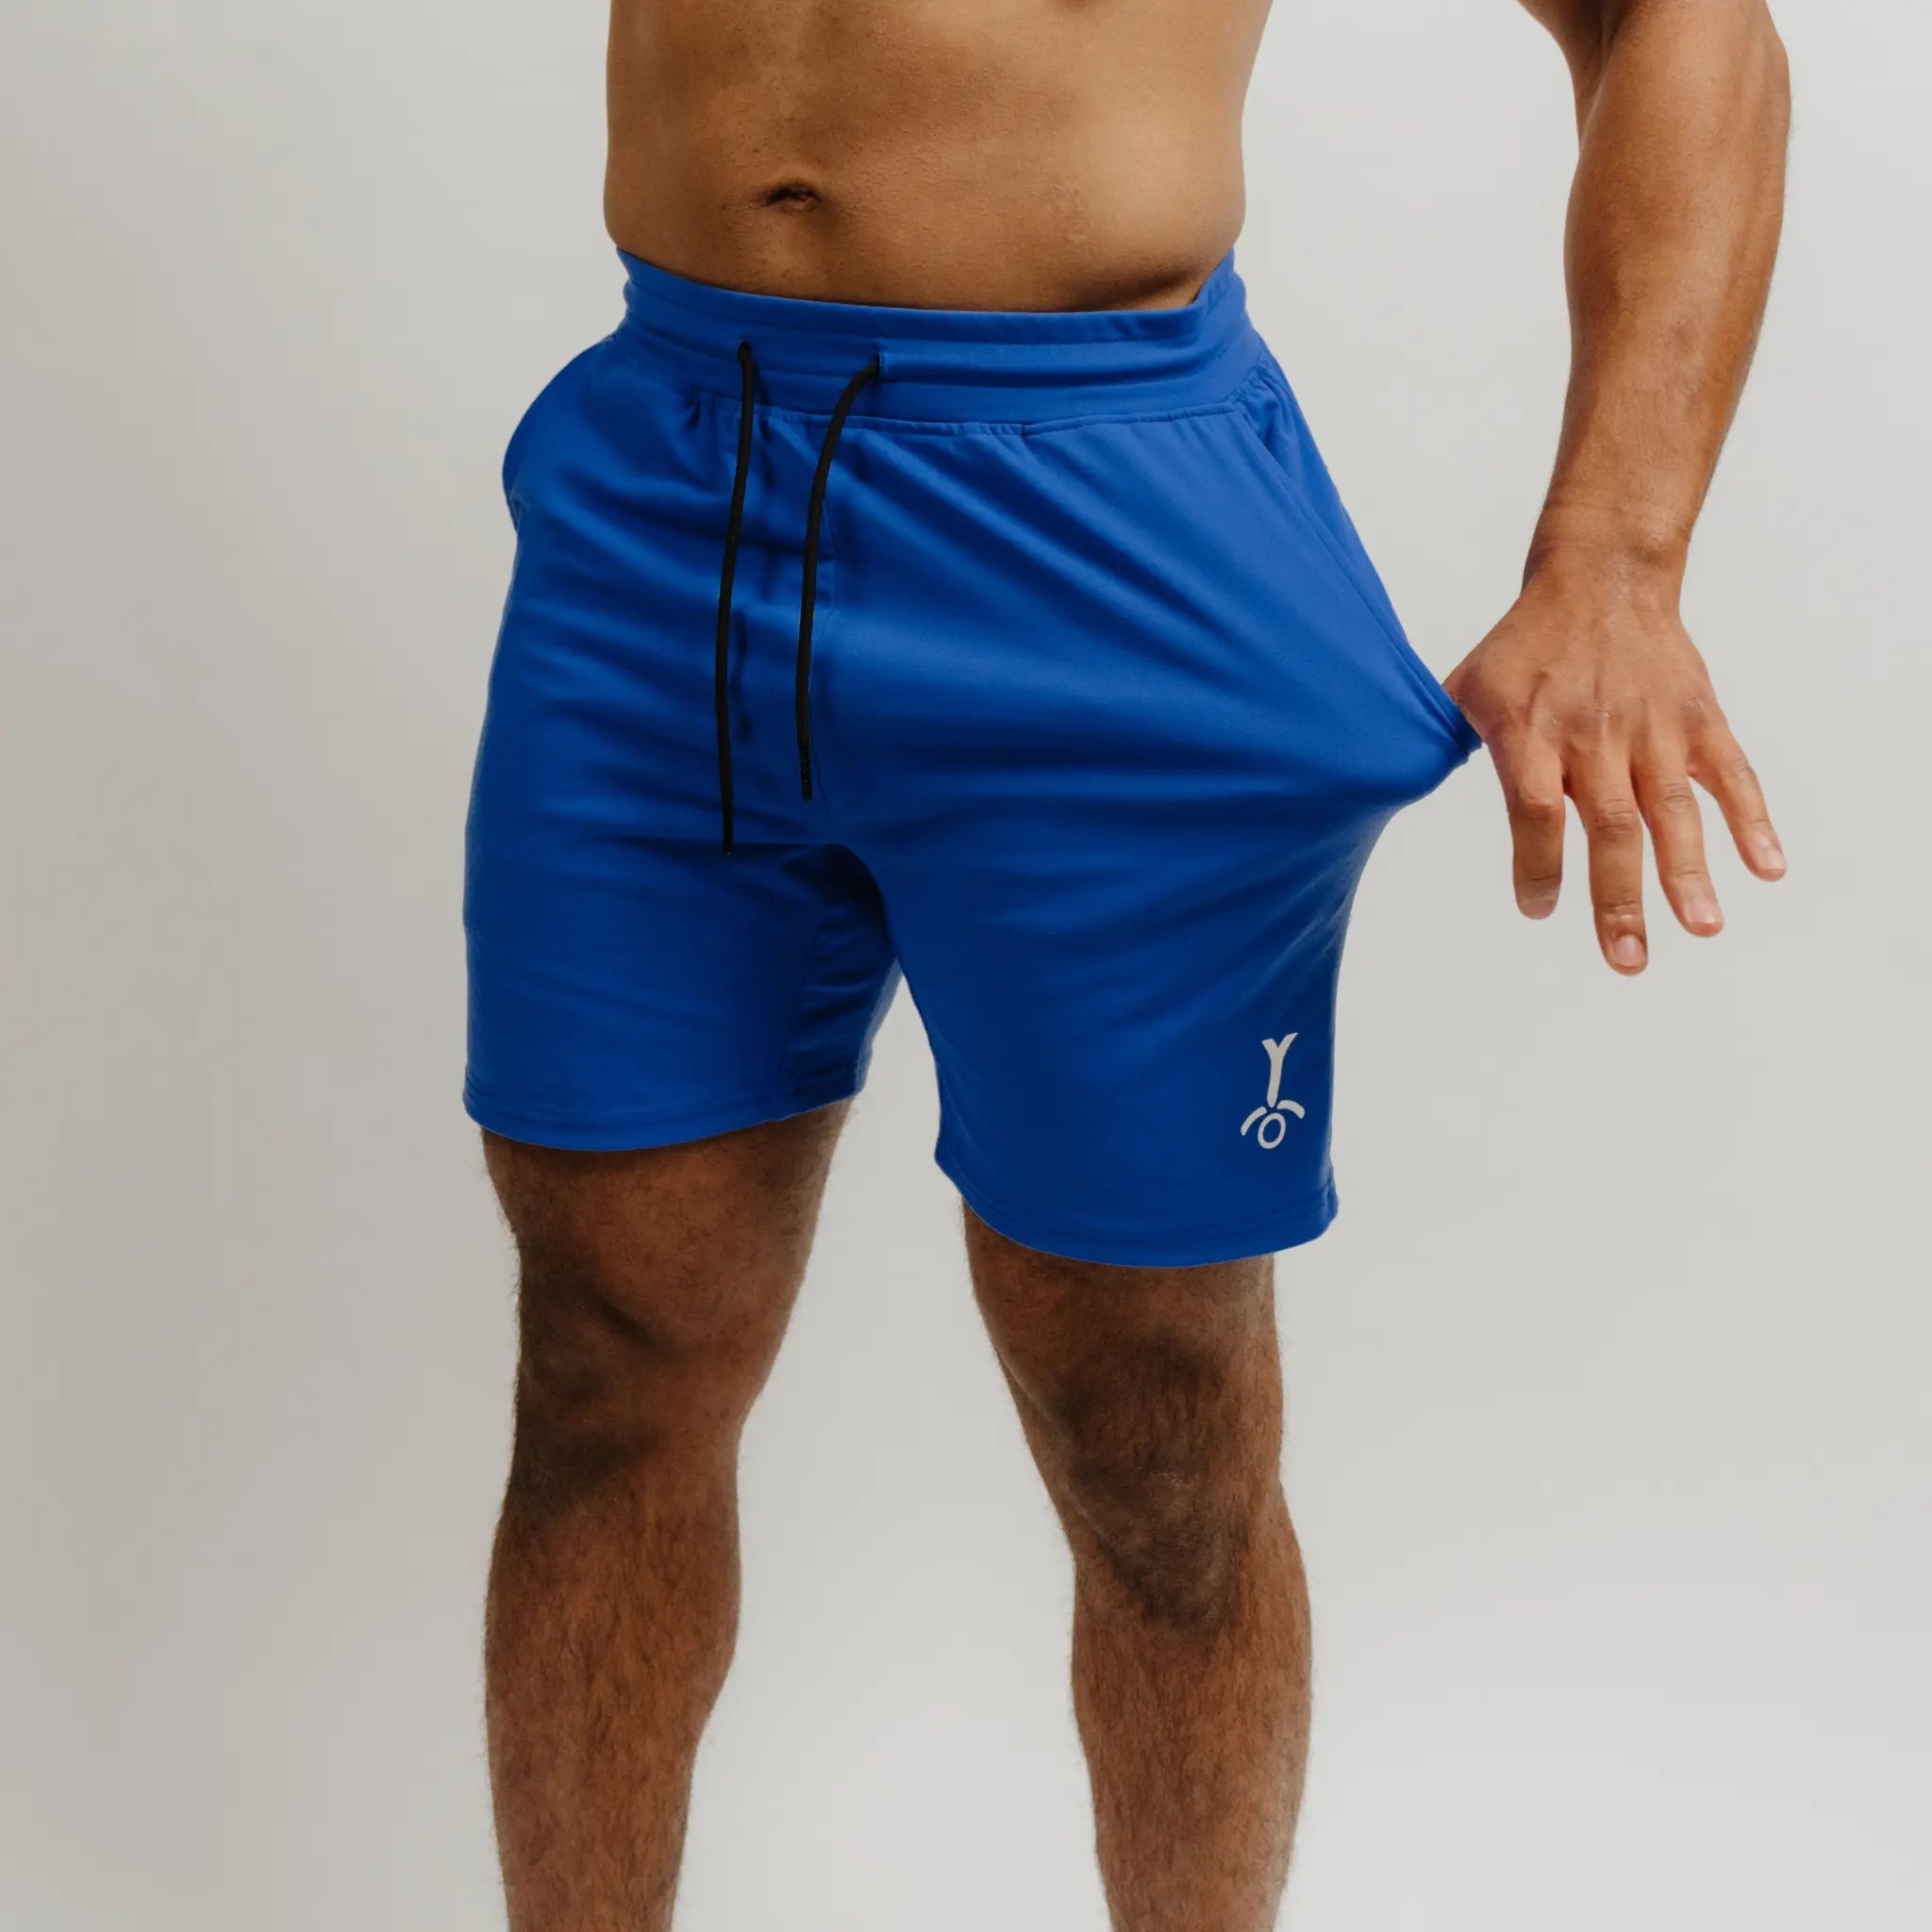 premium blend shorts for comfort and training